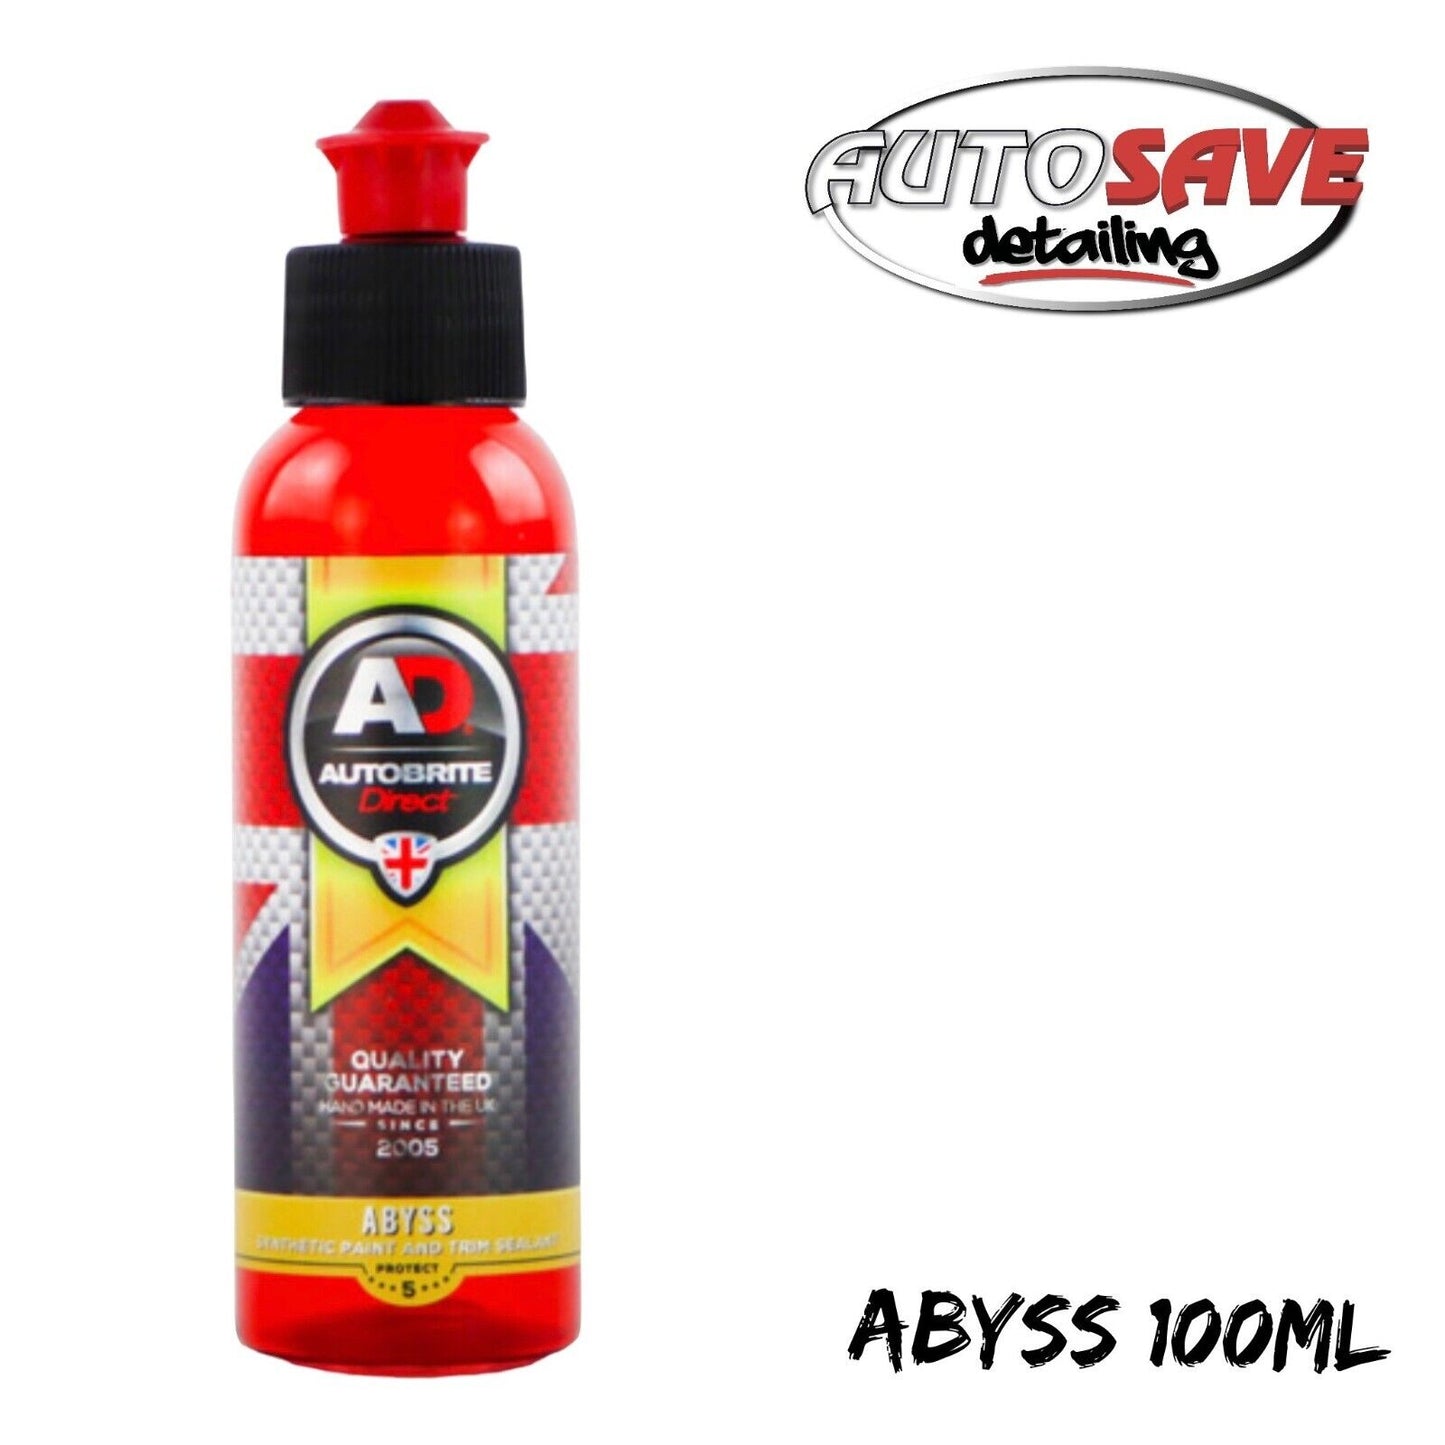 Autobrite Direct - The Abyss, Synthetic Paint Sealant 100ml